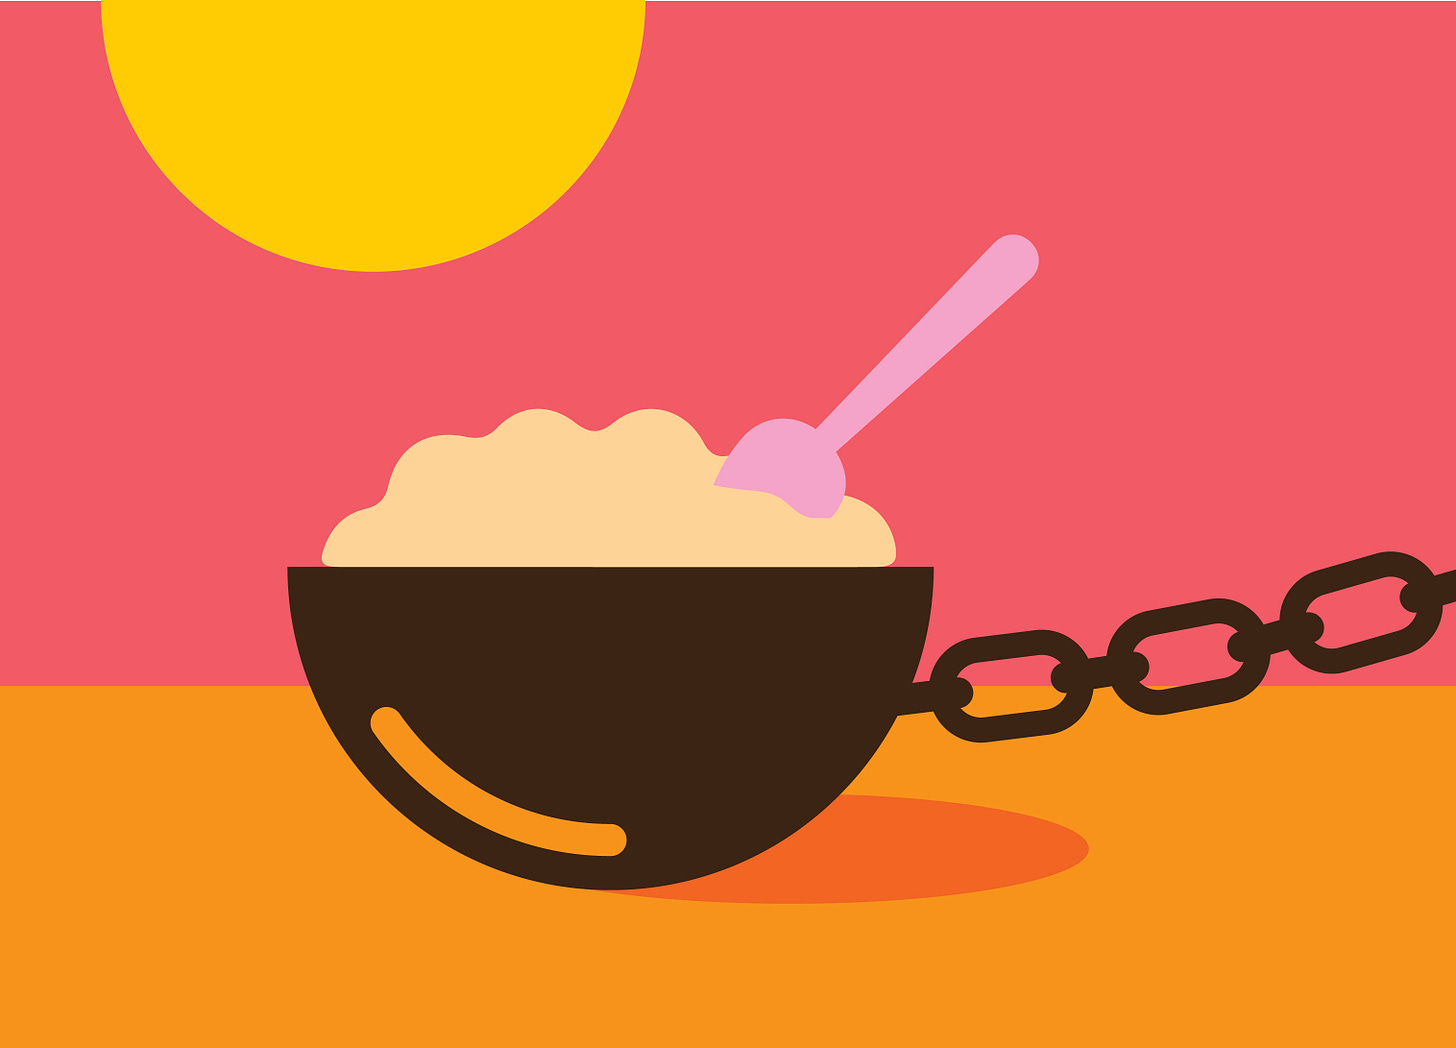 Graphic of a bowl of porridge in the style of a ball and chain